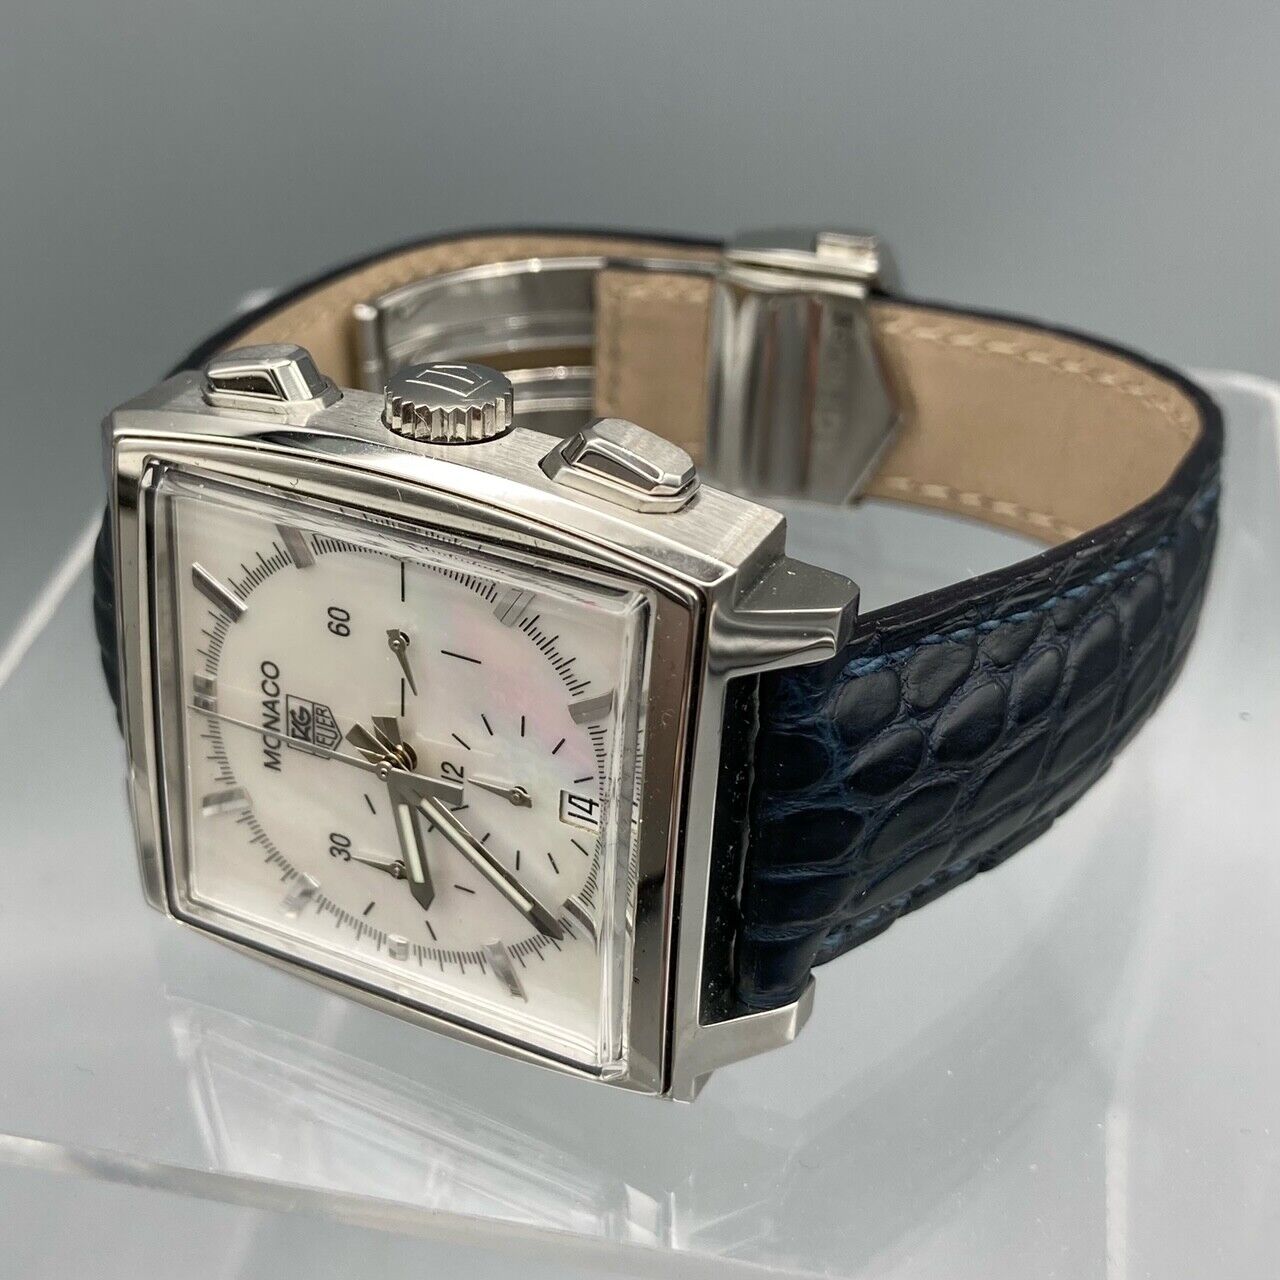 Tag Heuer Monaco Chronograph Mother of Pearl Watch - CW2119.EB0017